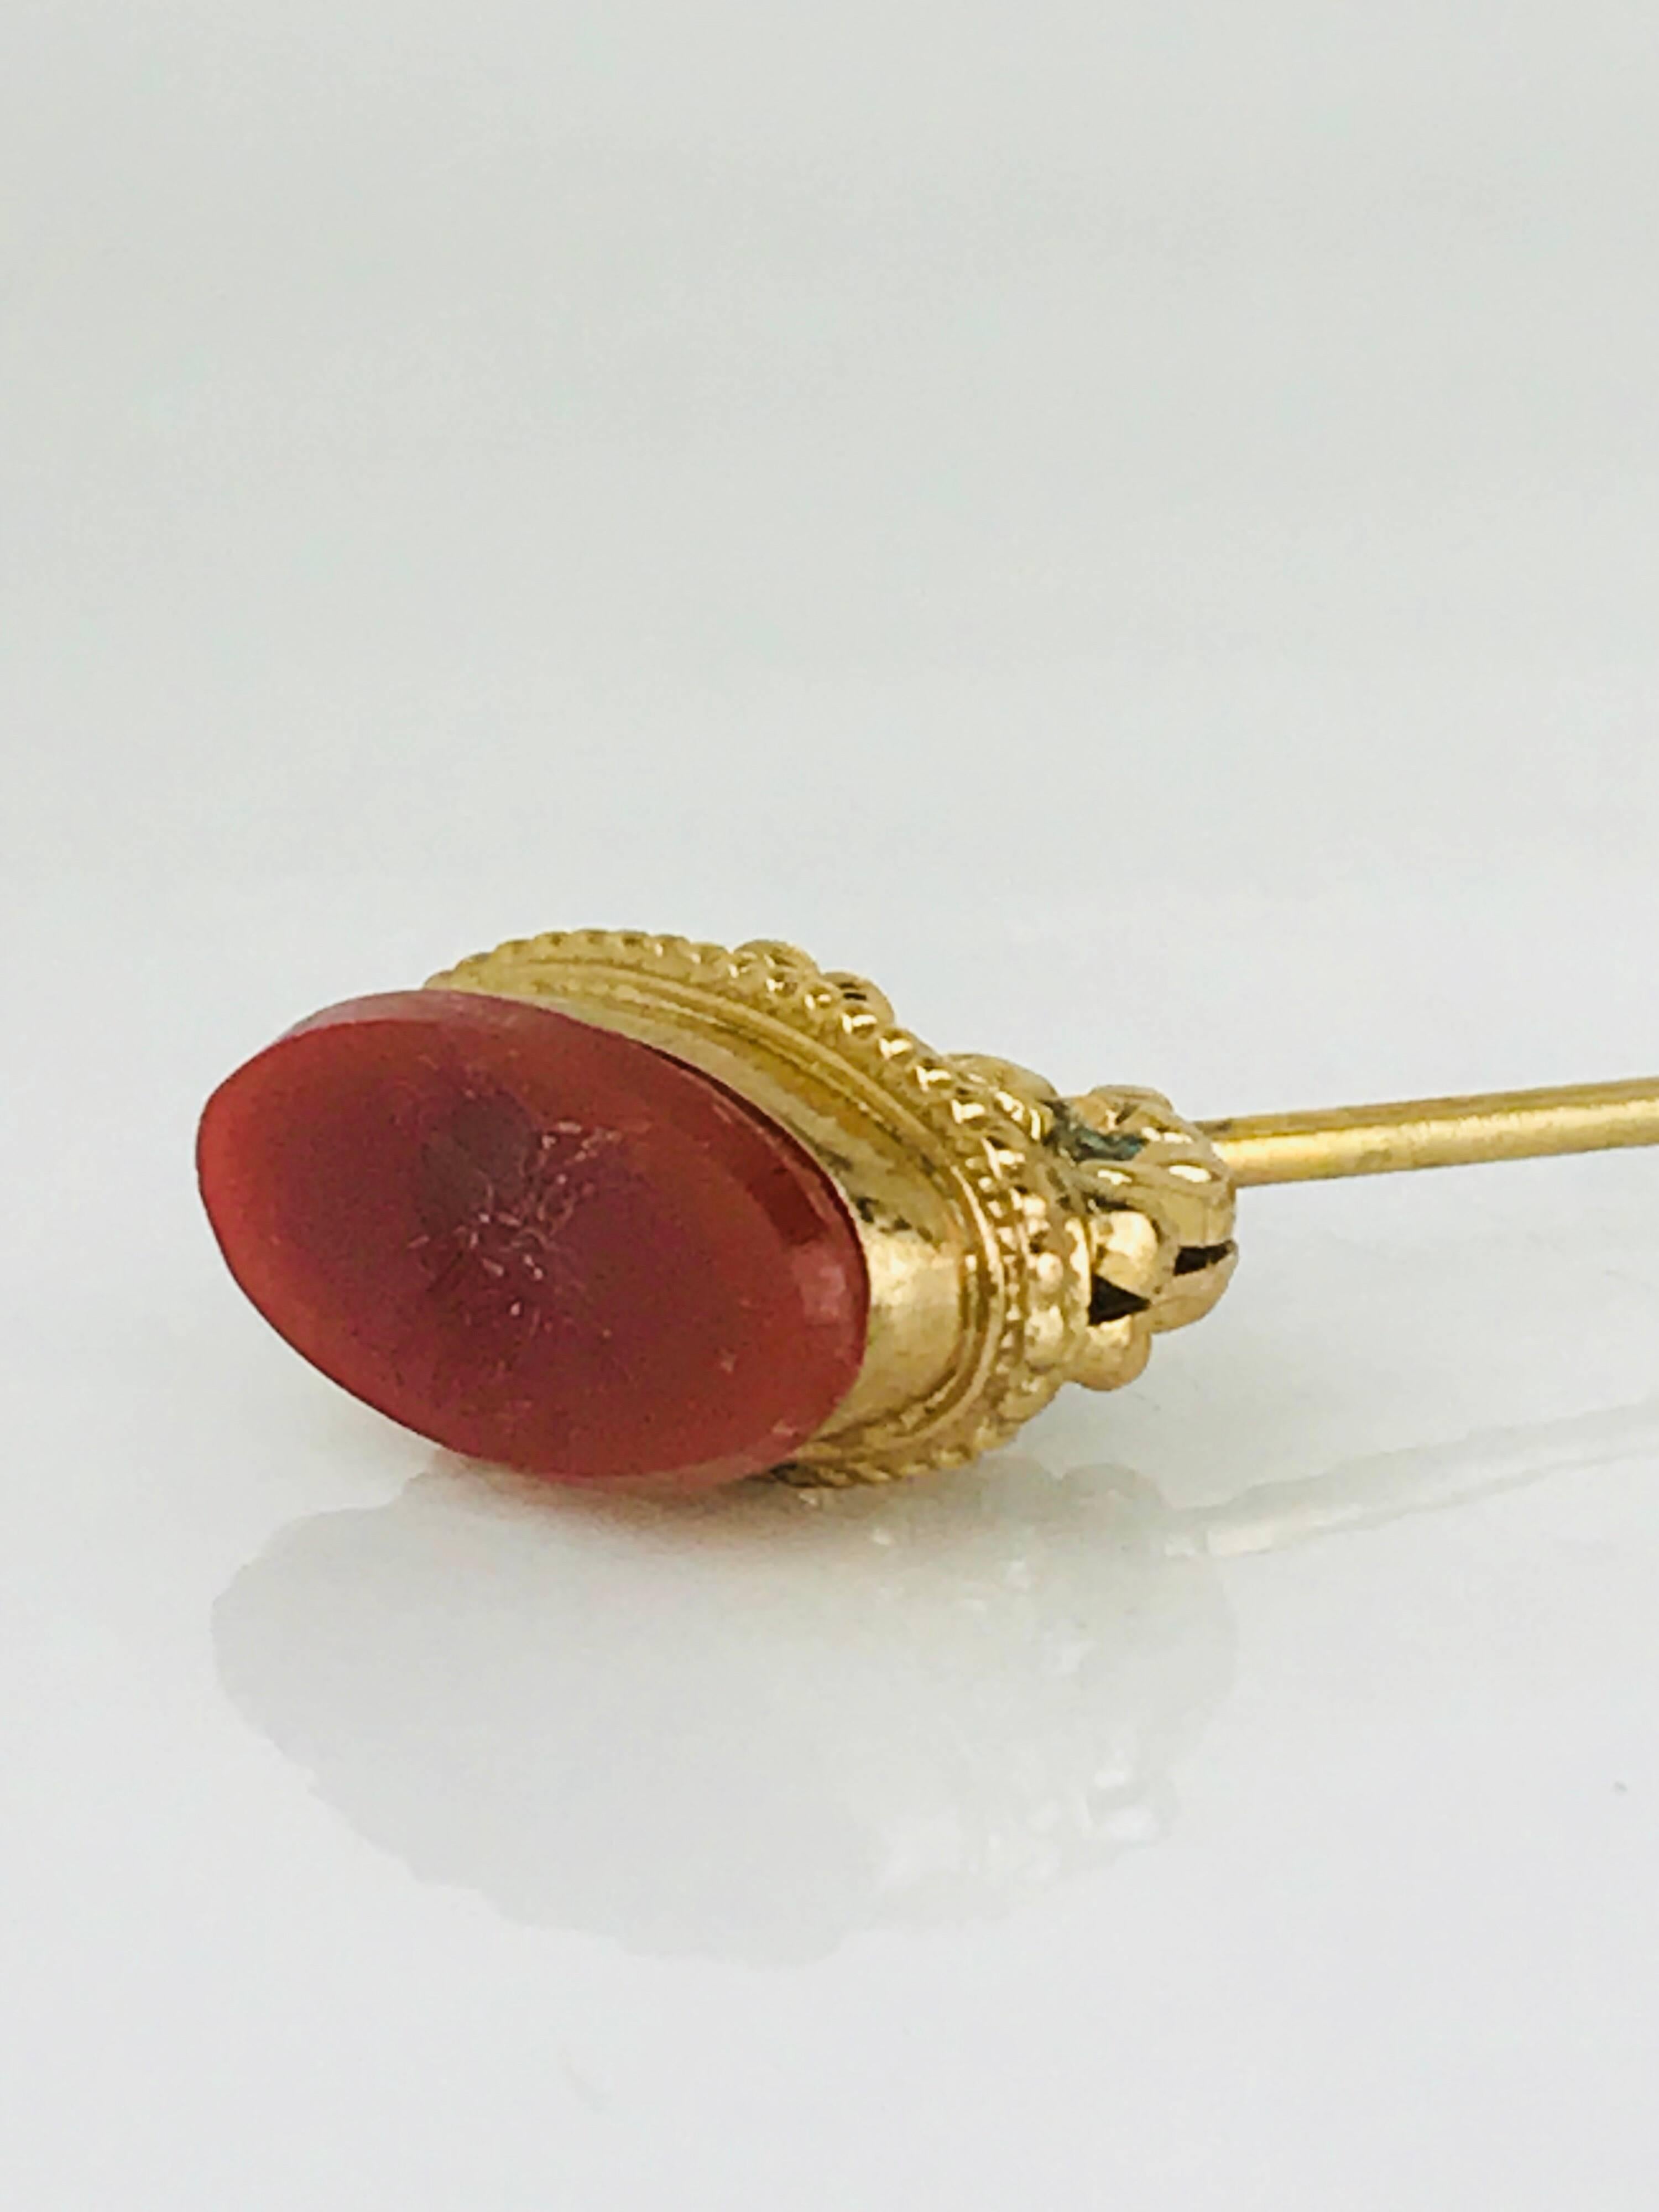 Carnelian Bird Etched Emblem Hat Pin, Victorian Era, Gilded Vermeil, circa 1860 In Good Condition For Sale In Aliso Viejo, CA